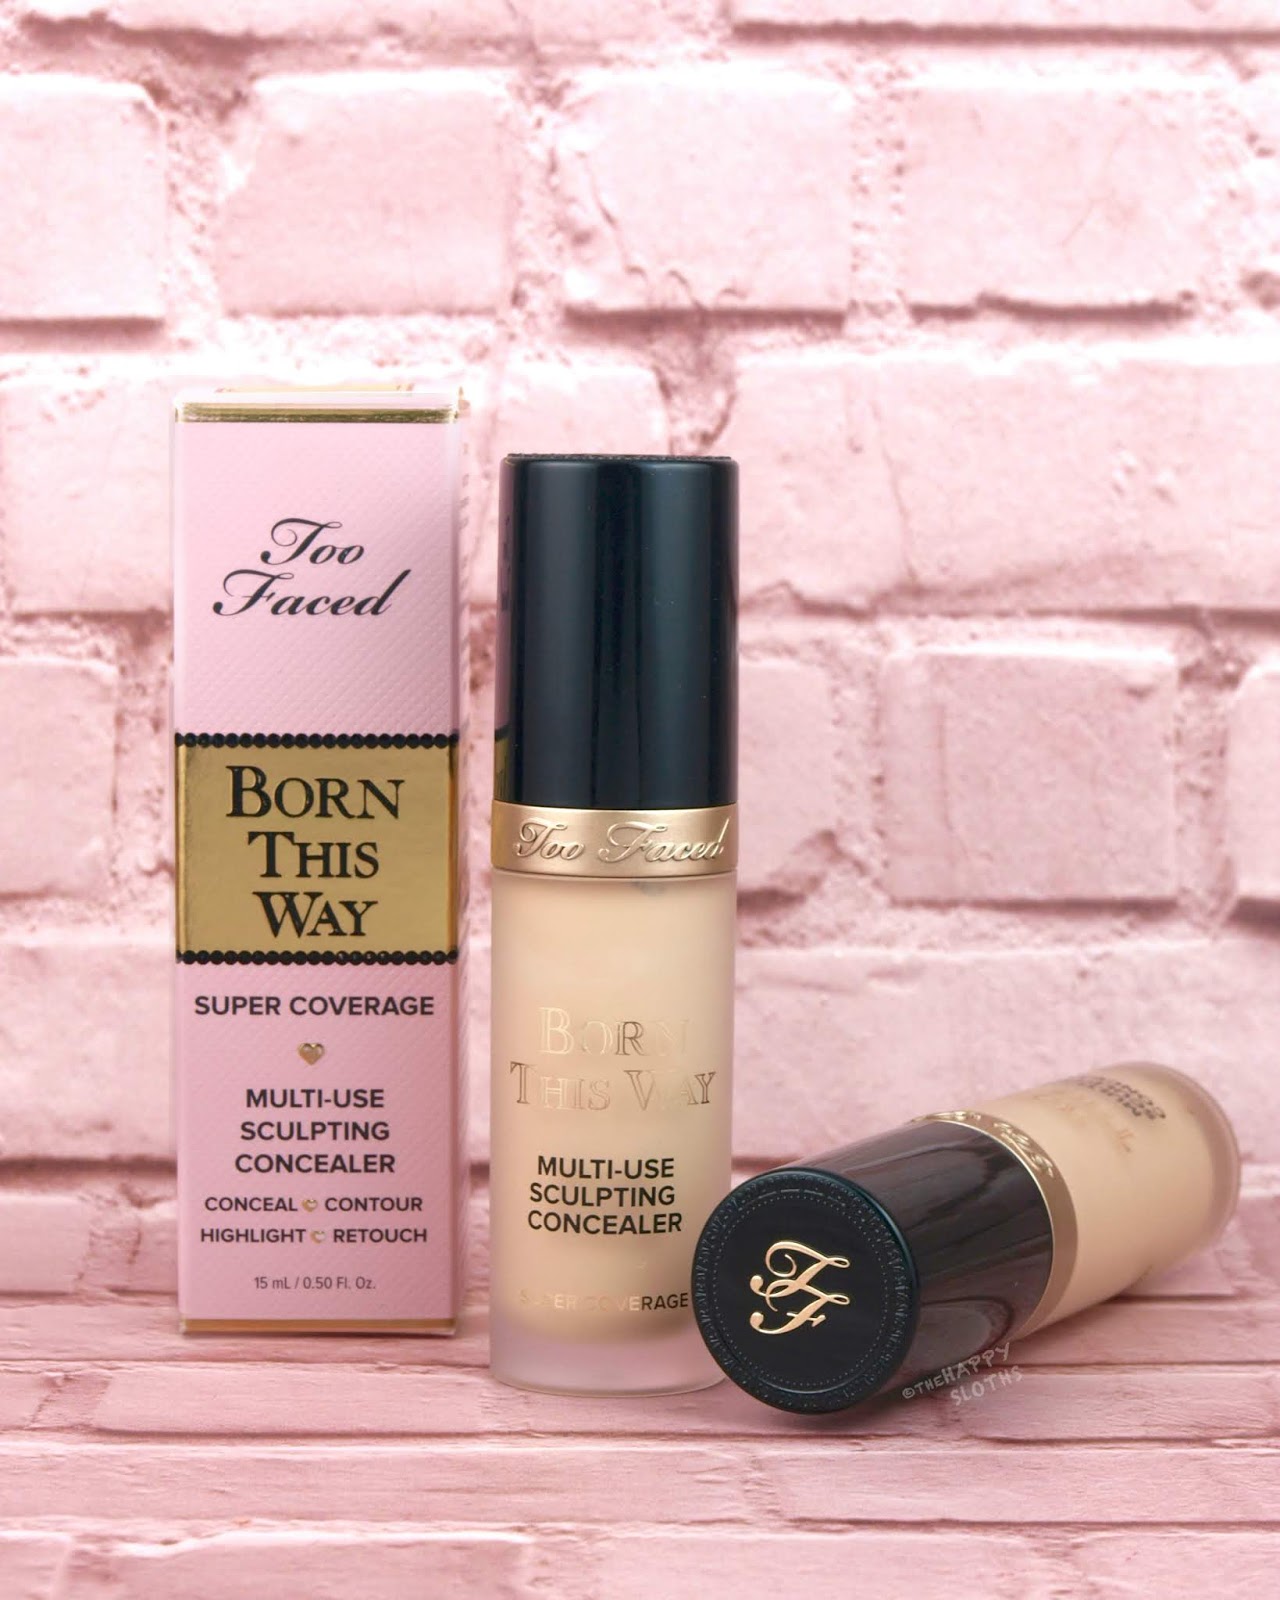 Too Faced | Born Way Super Coverage Multi-Use Sculpting Concealer: Review | The Happy Sloths: Beauty, Makeup, and Skincare Blog with Reviews and Swatches